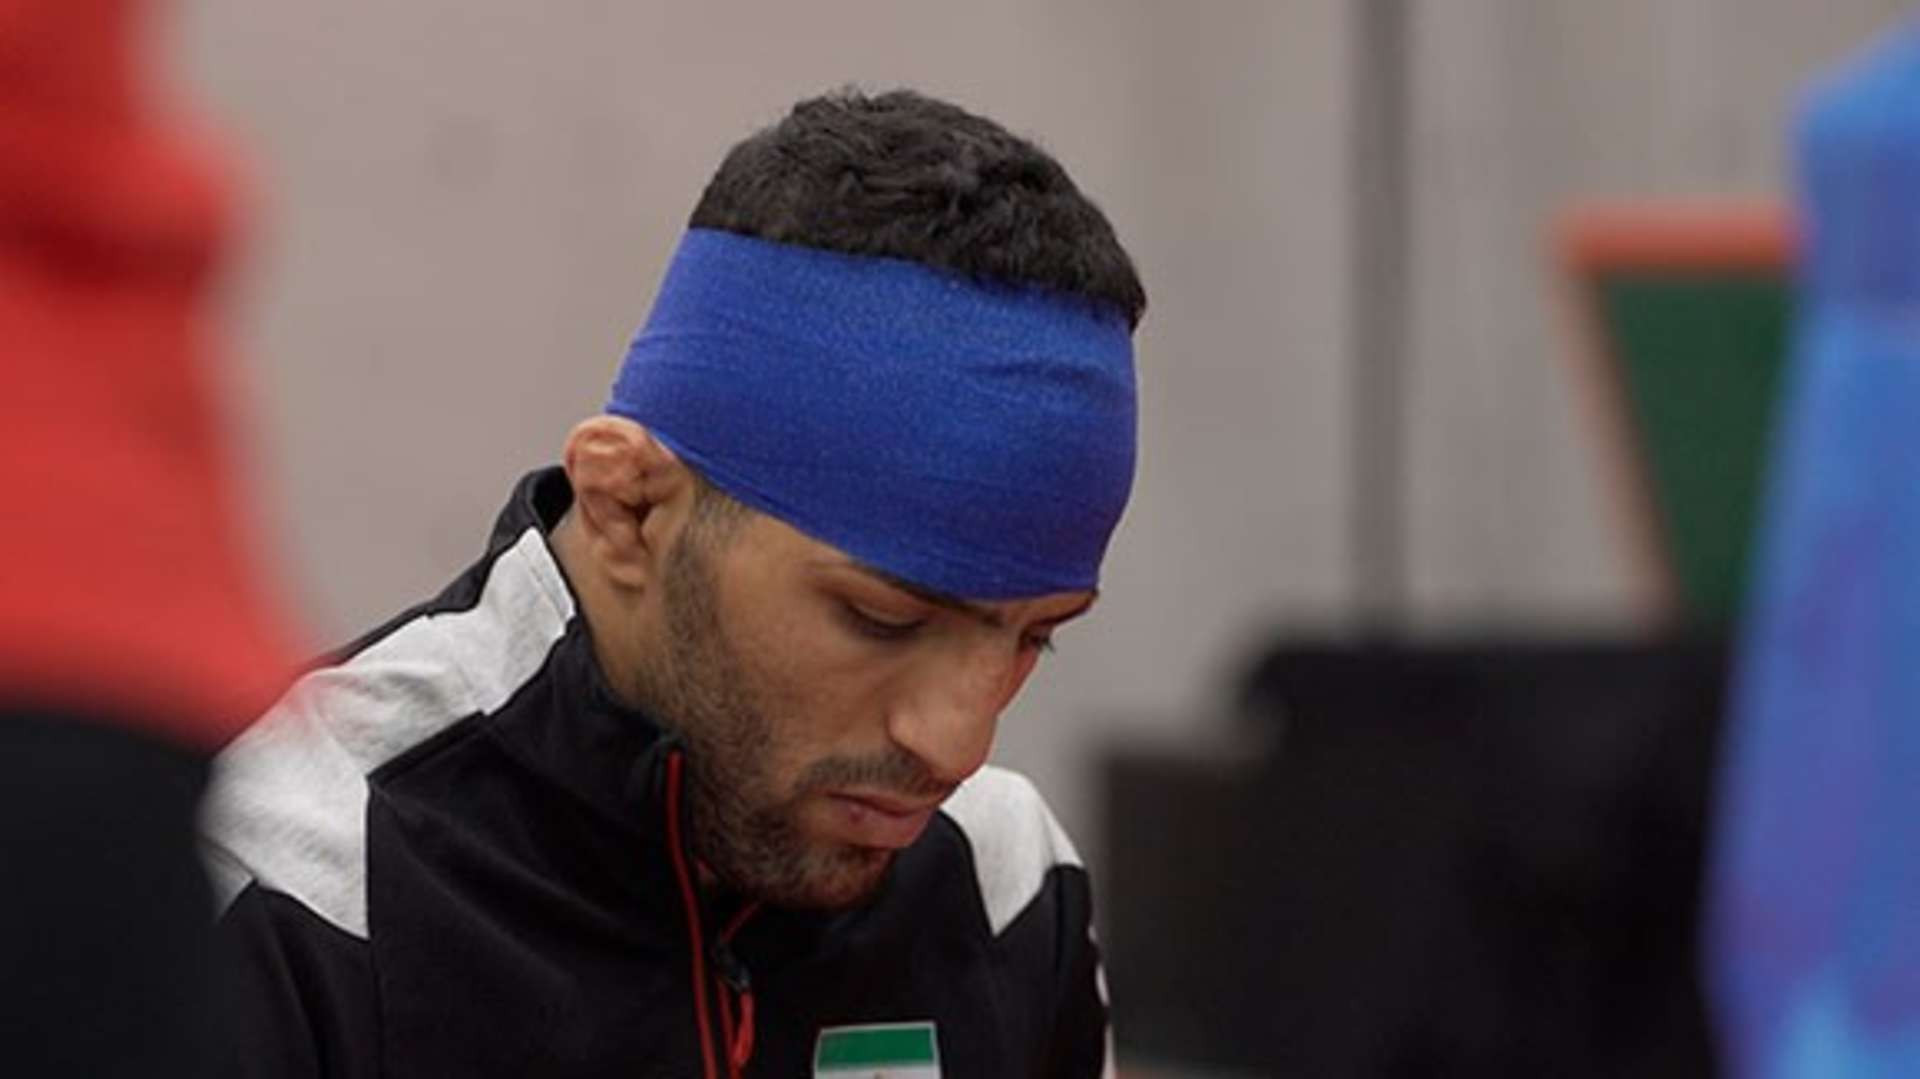 Saeid Mollaei allegedly received calls from Government officials and the President of the Iran National Olympic Committee threatening him and his family if he did not pull out of the World Championships in Tokyo ©IJF